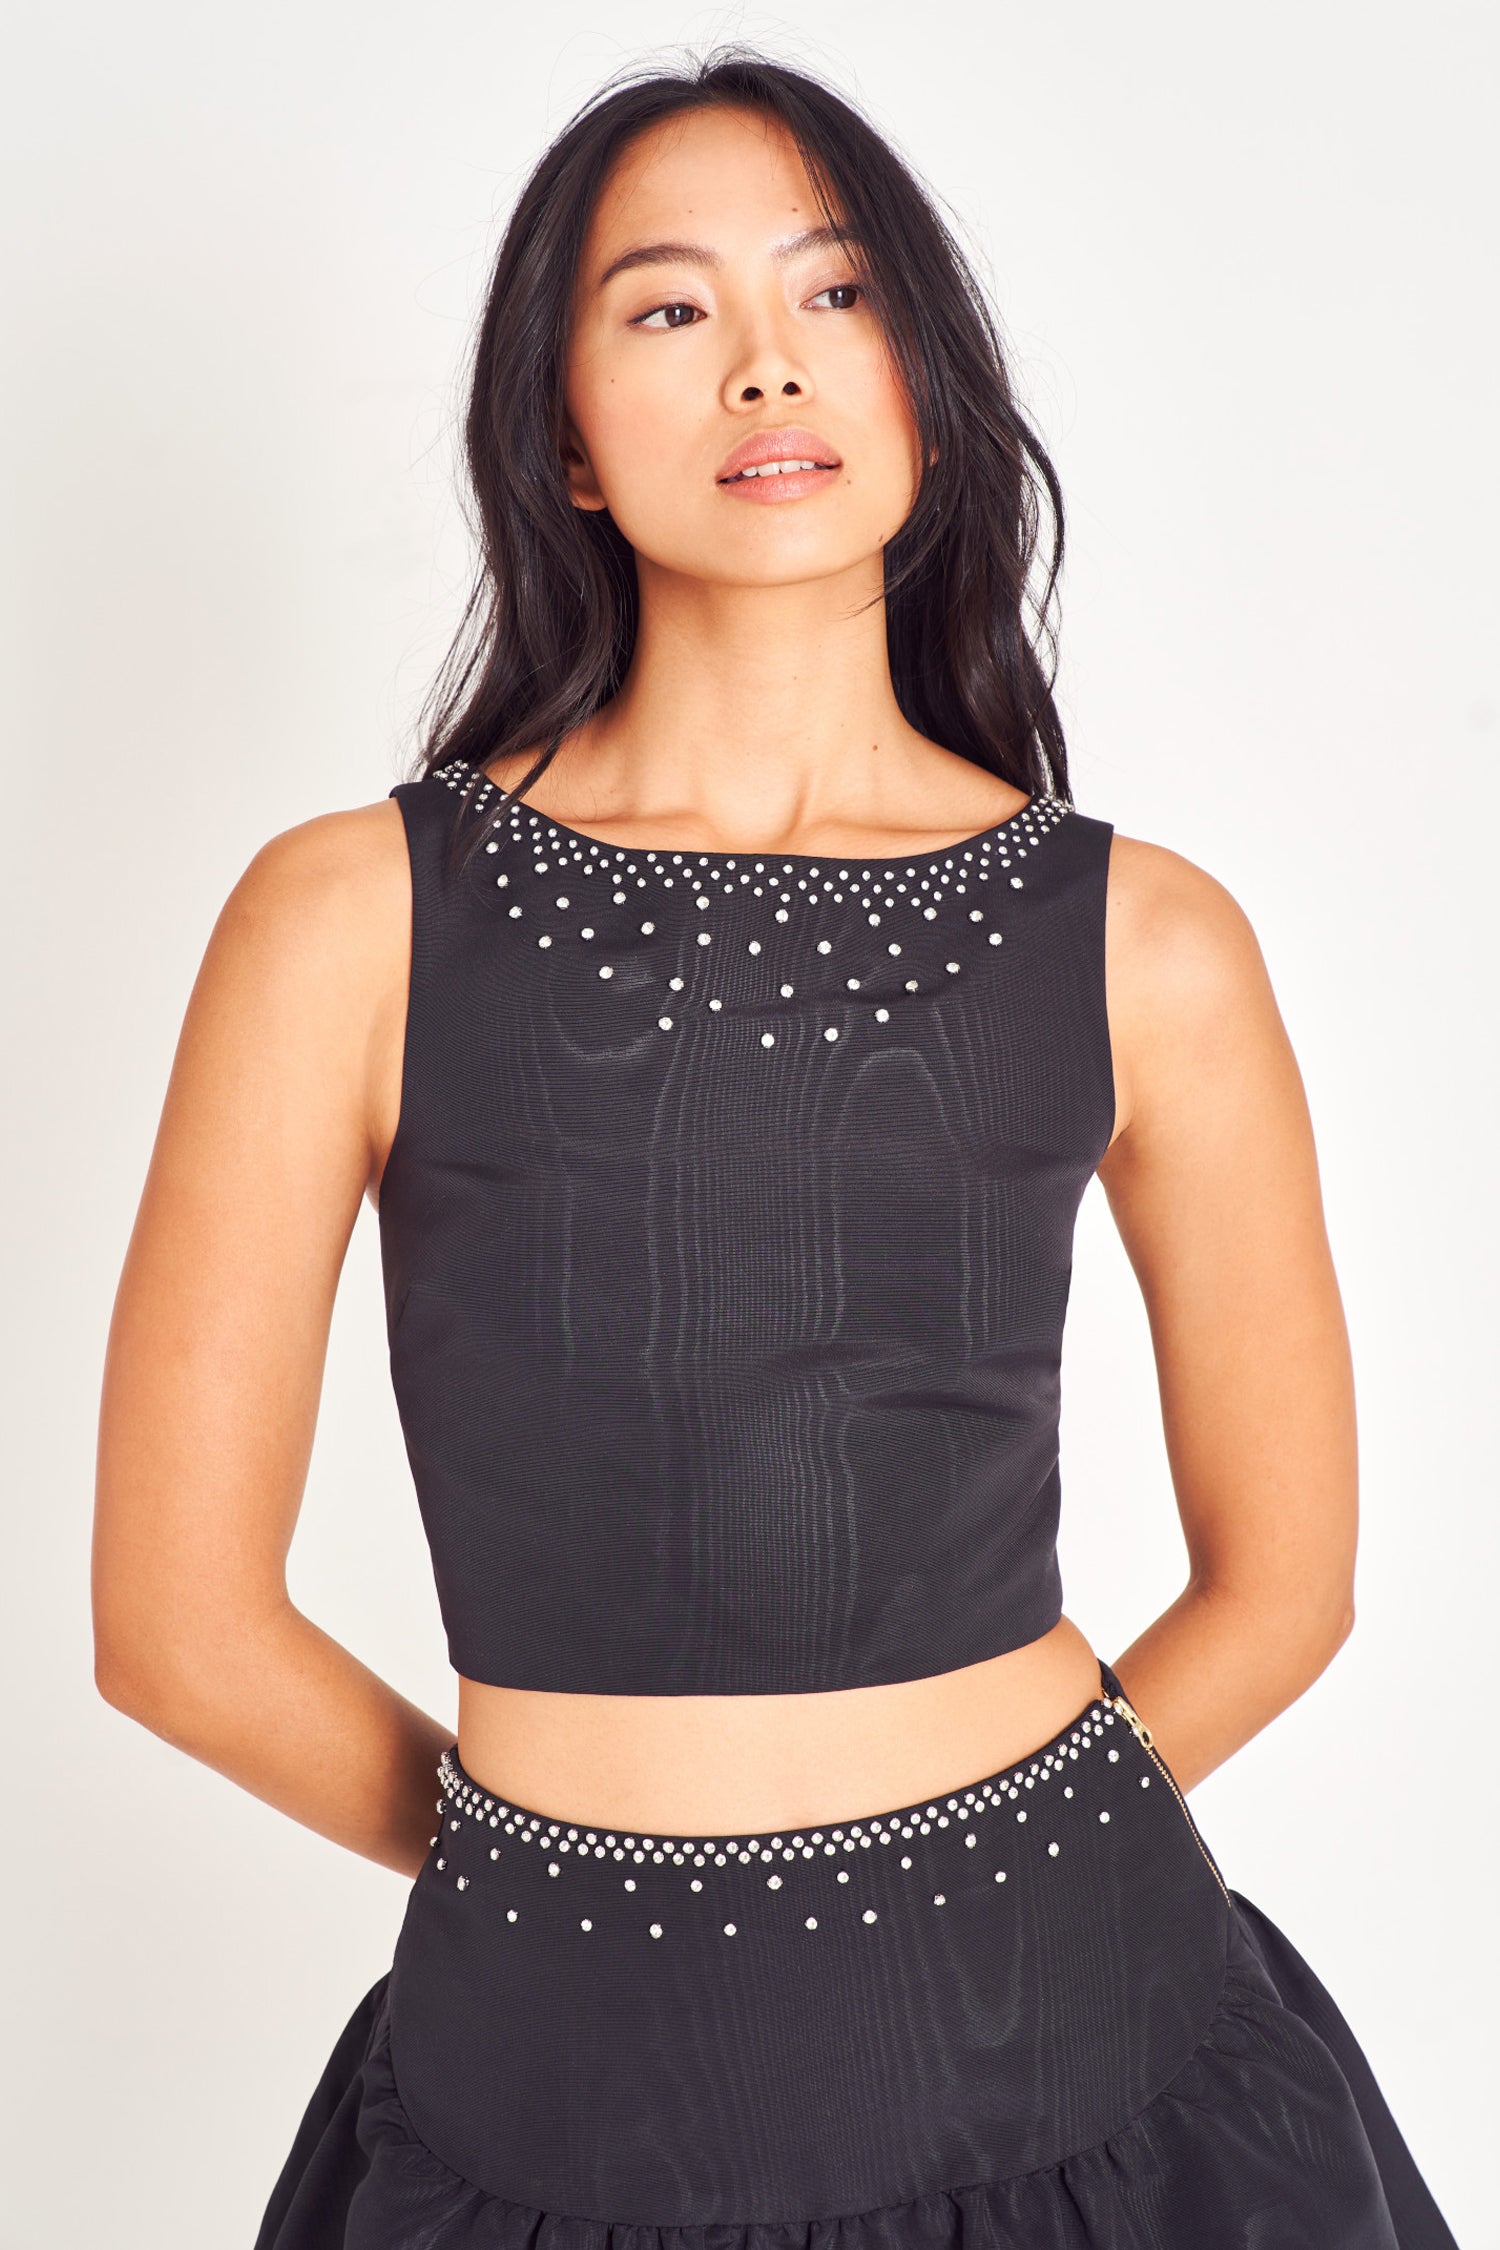 Kanoa Fitted Crop Top